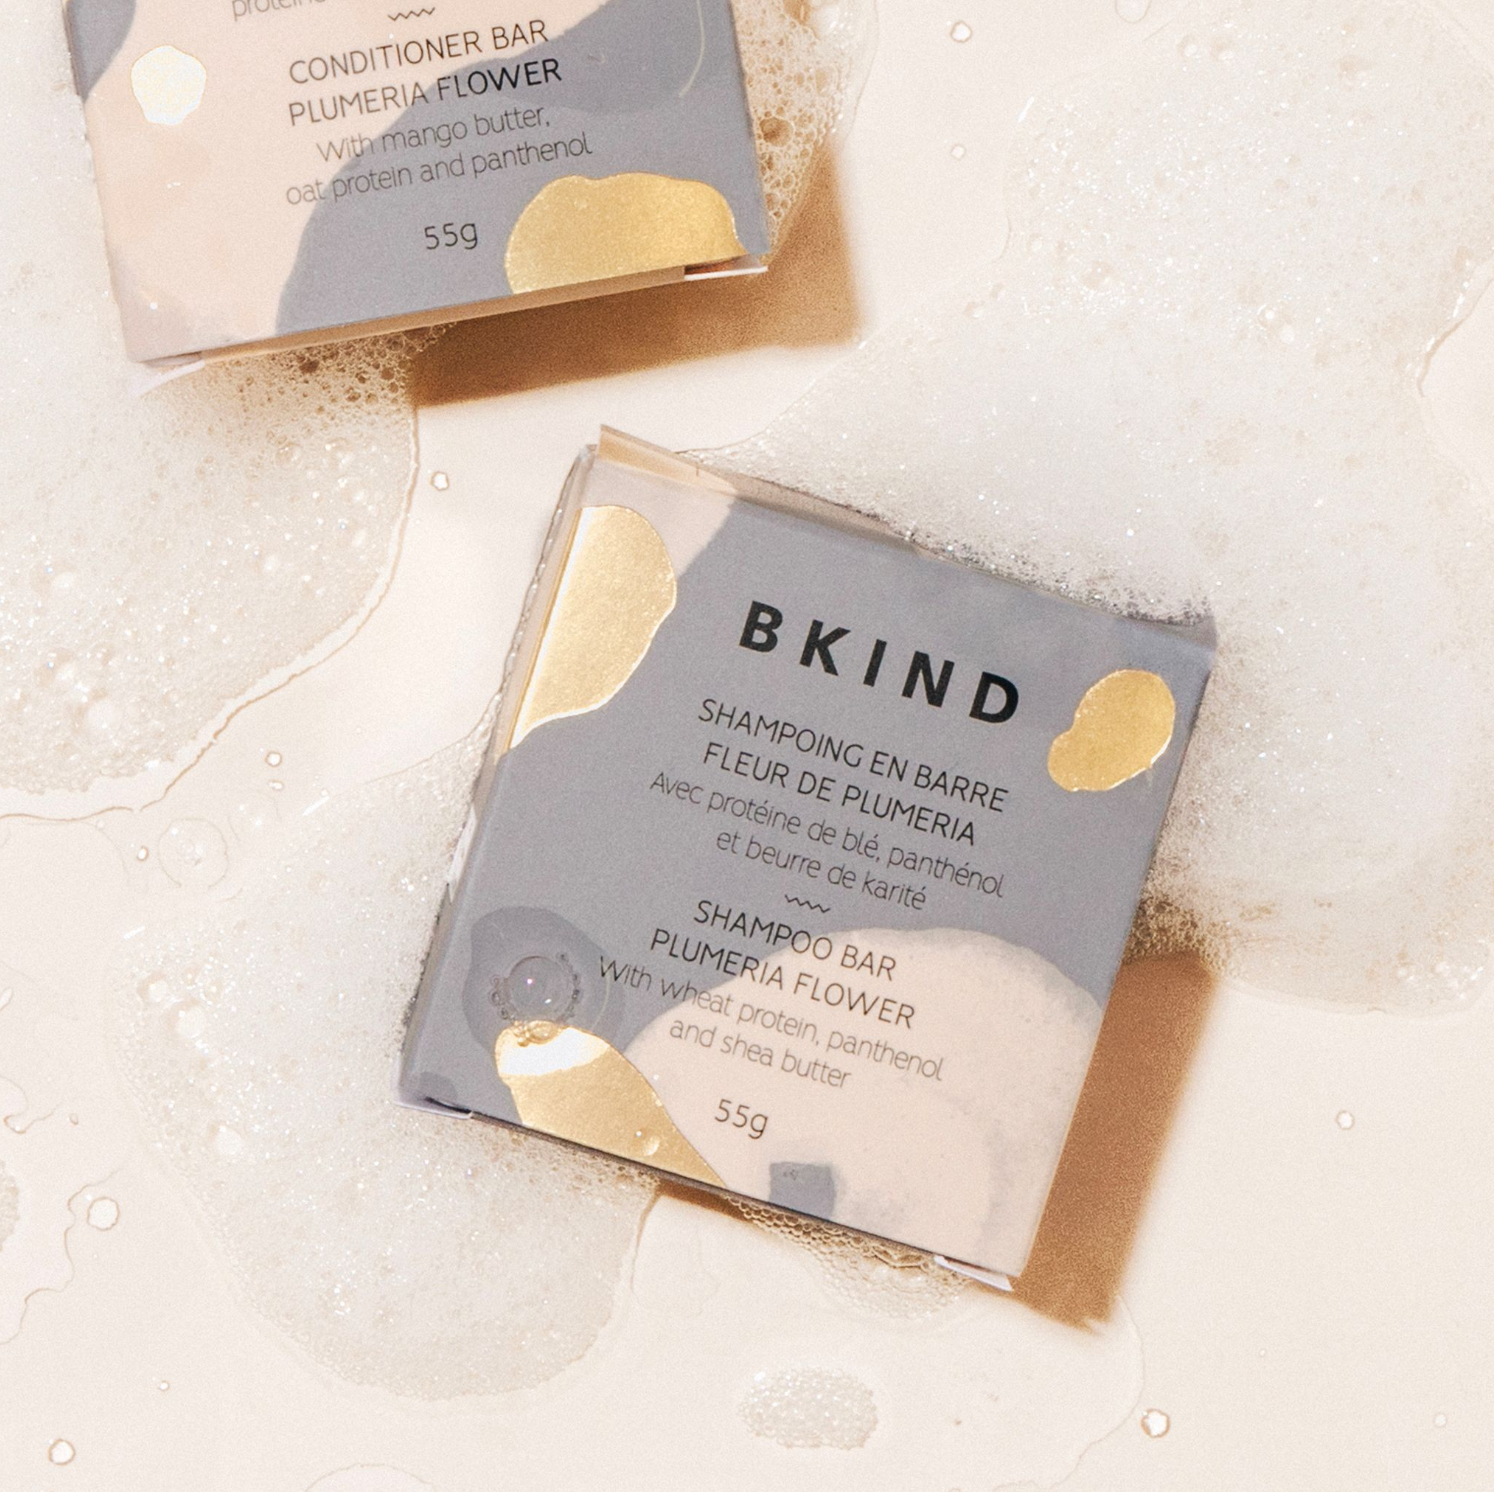 Shampoo bar - Curly or coily hair vegan natural sulfate-free BKIND